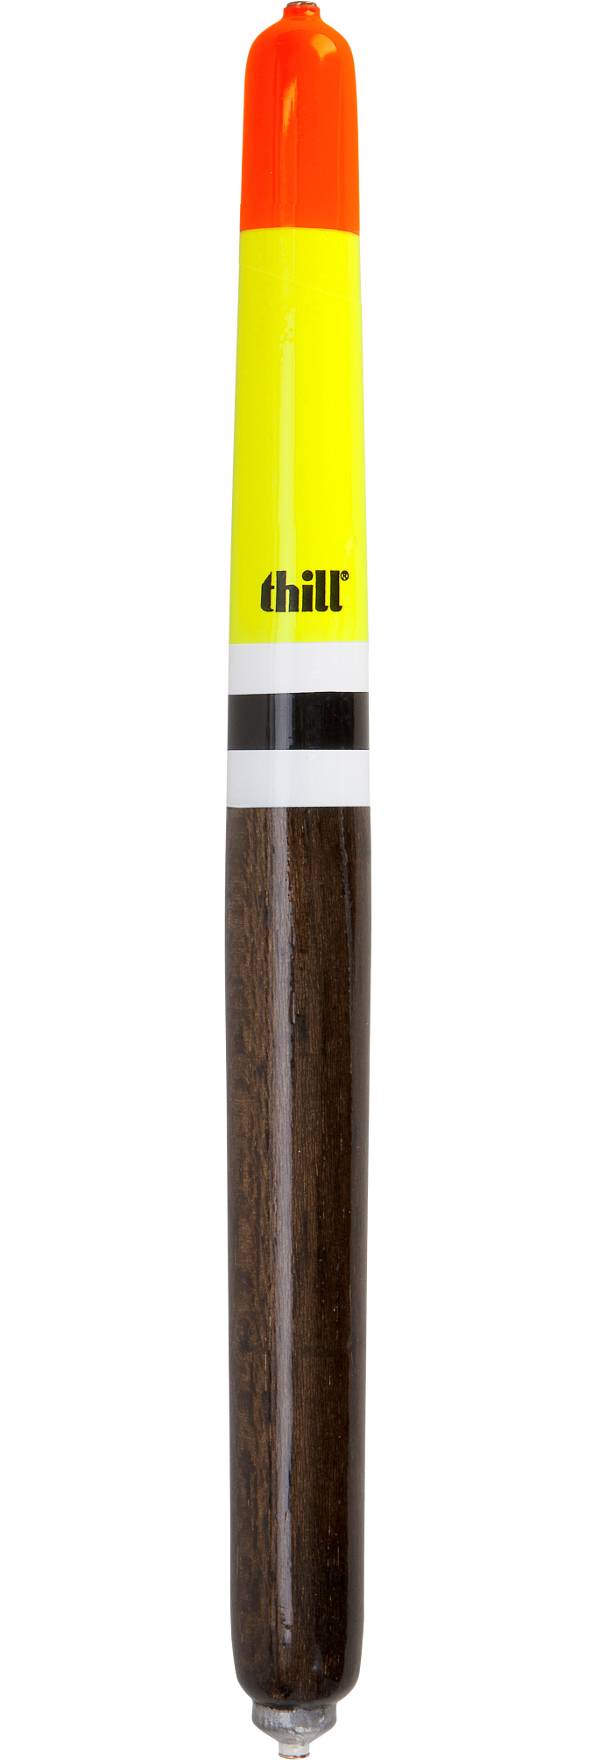 Thill Weighted Balsa Pole Float product image